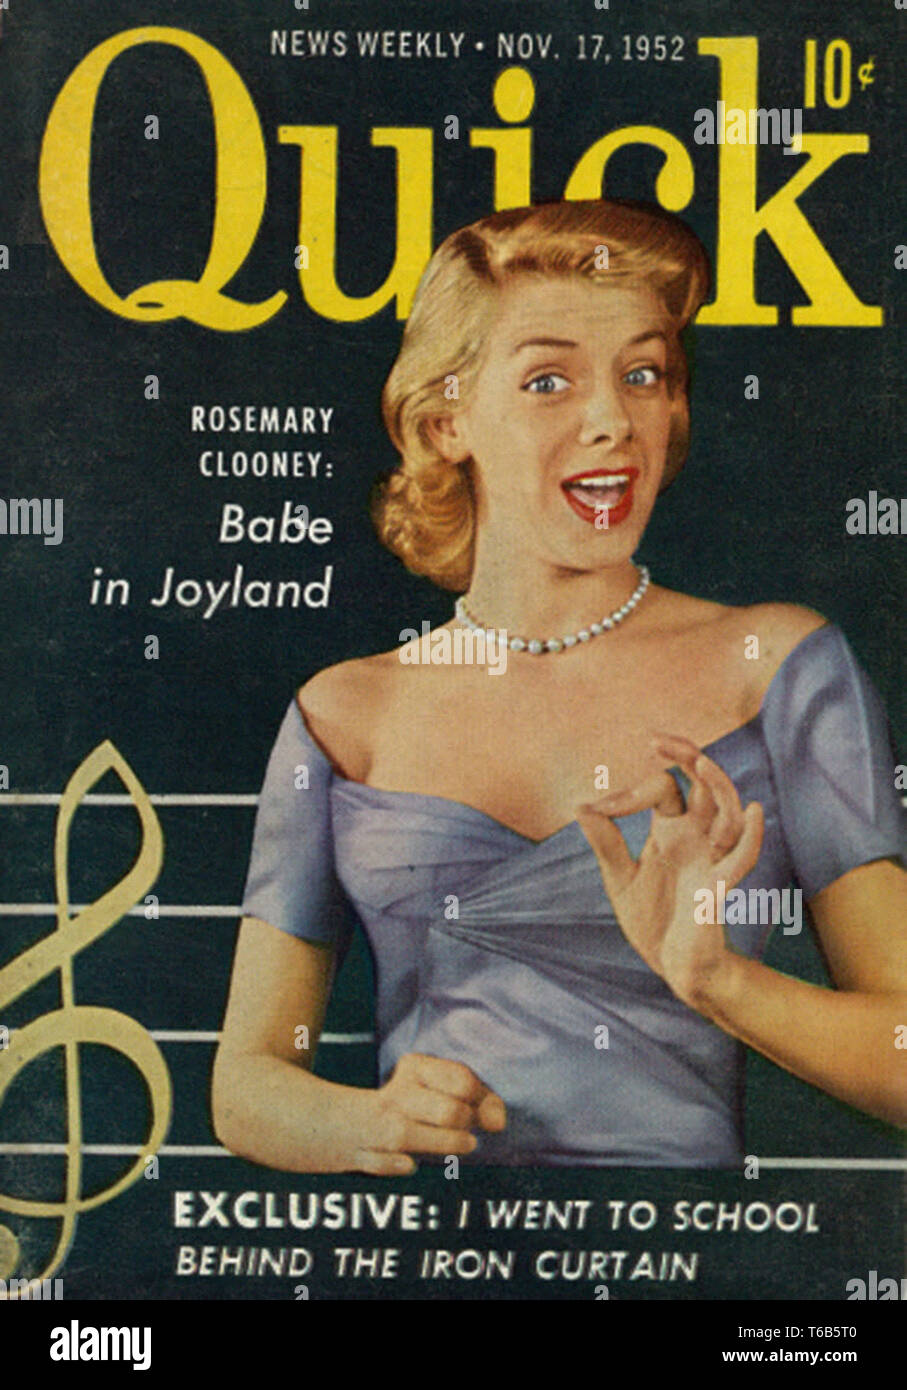 Vintage movie magazine cover - Quick Magazine with Singer Actress Rosemary Clooney, 1952 Stock Photo